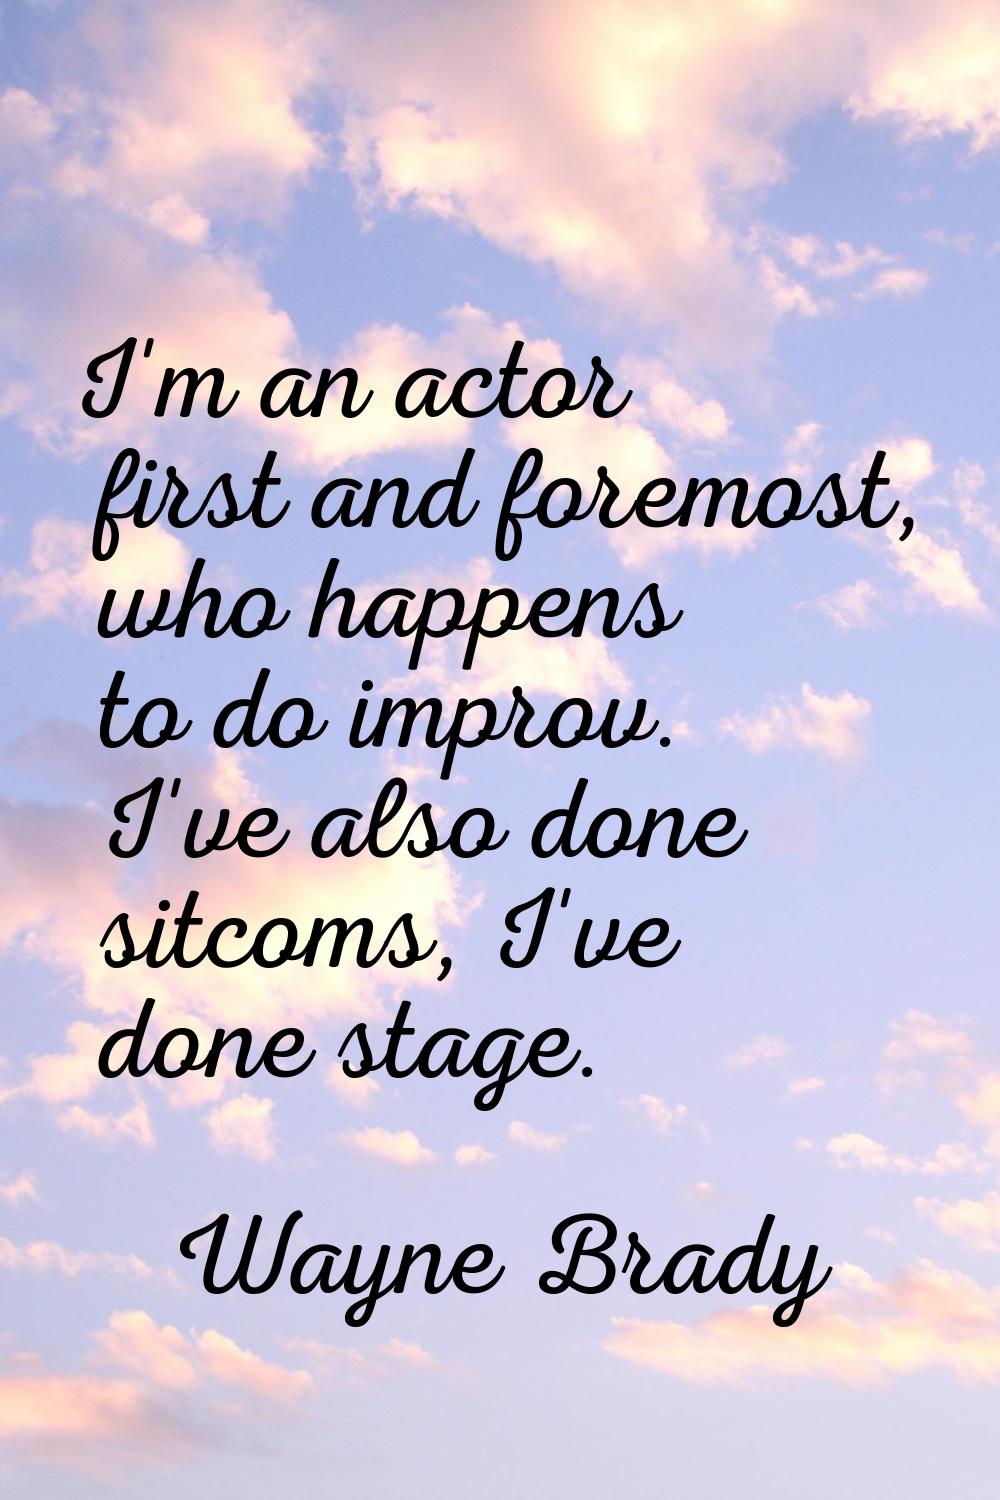 I'm an actor first and foremost, who happens to do improv. I've also done sitcoms, I've done stage.